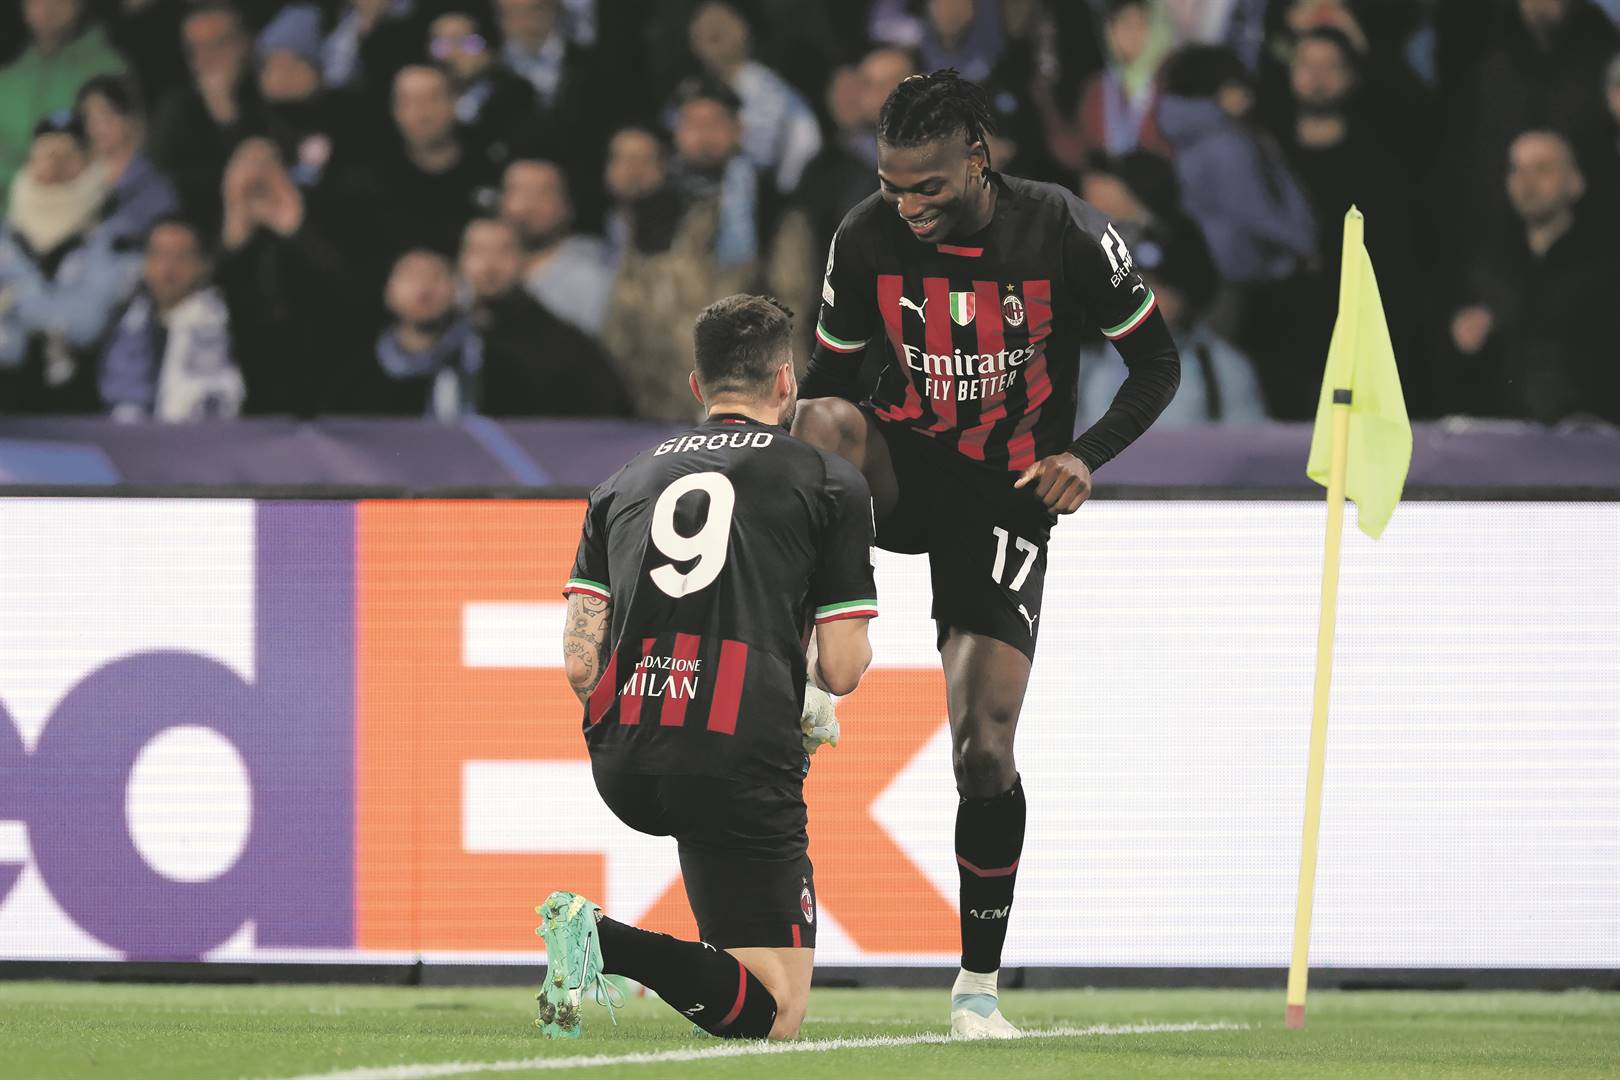 In AC or Inter, Milan is sure of Champs League final | City Press